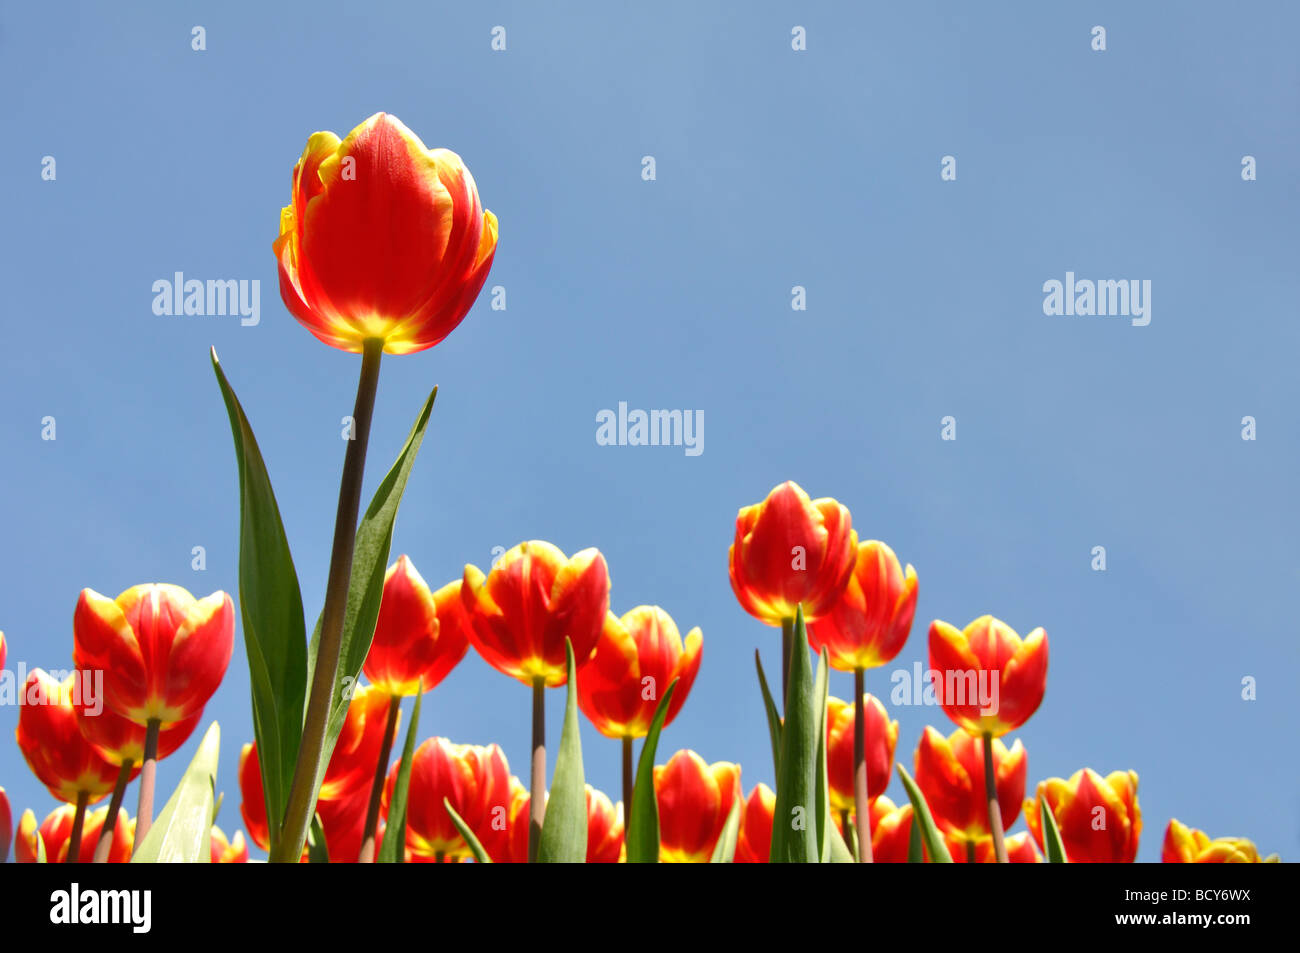 Red Lucky Strike Triumph tulips against blue sky Stock Photo